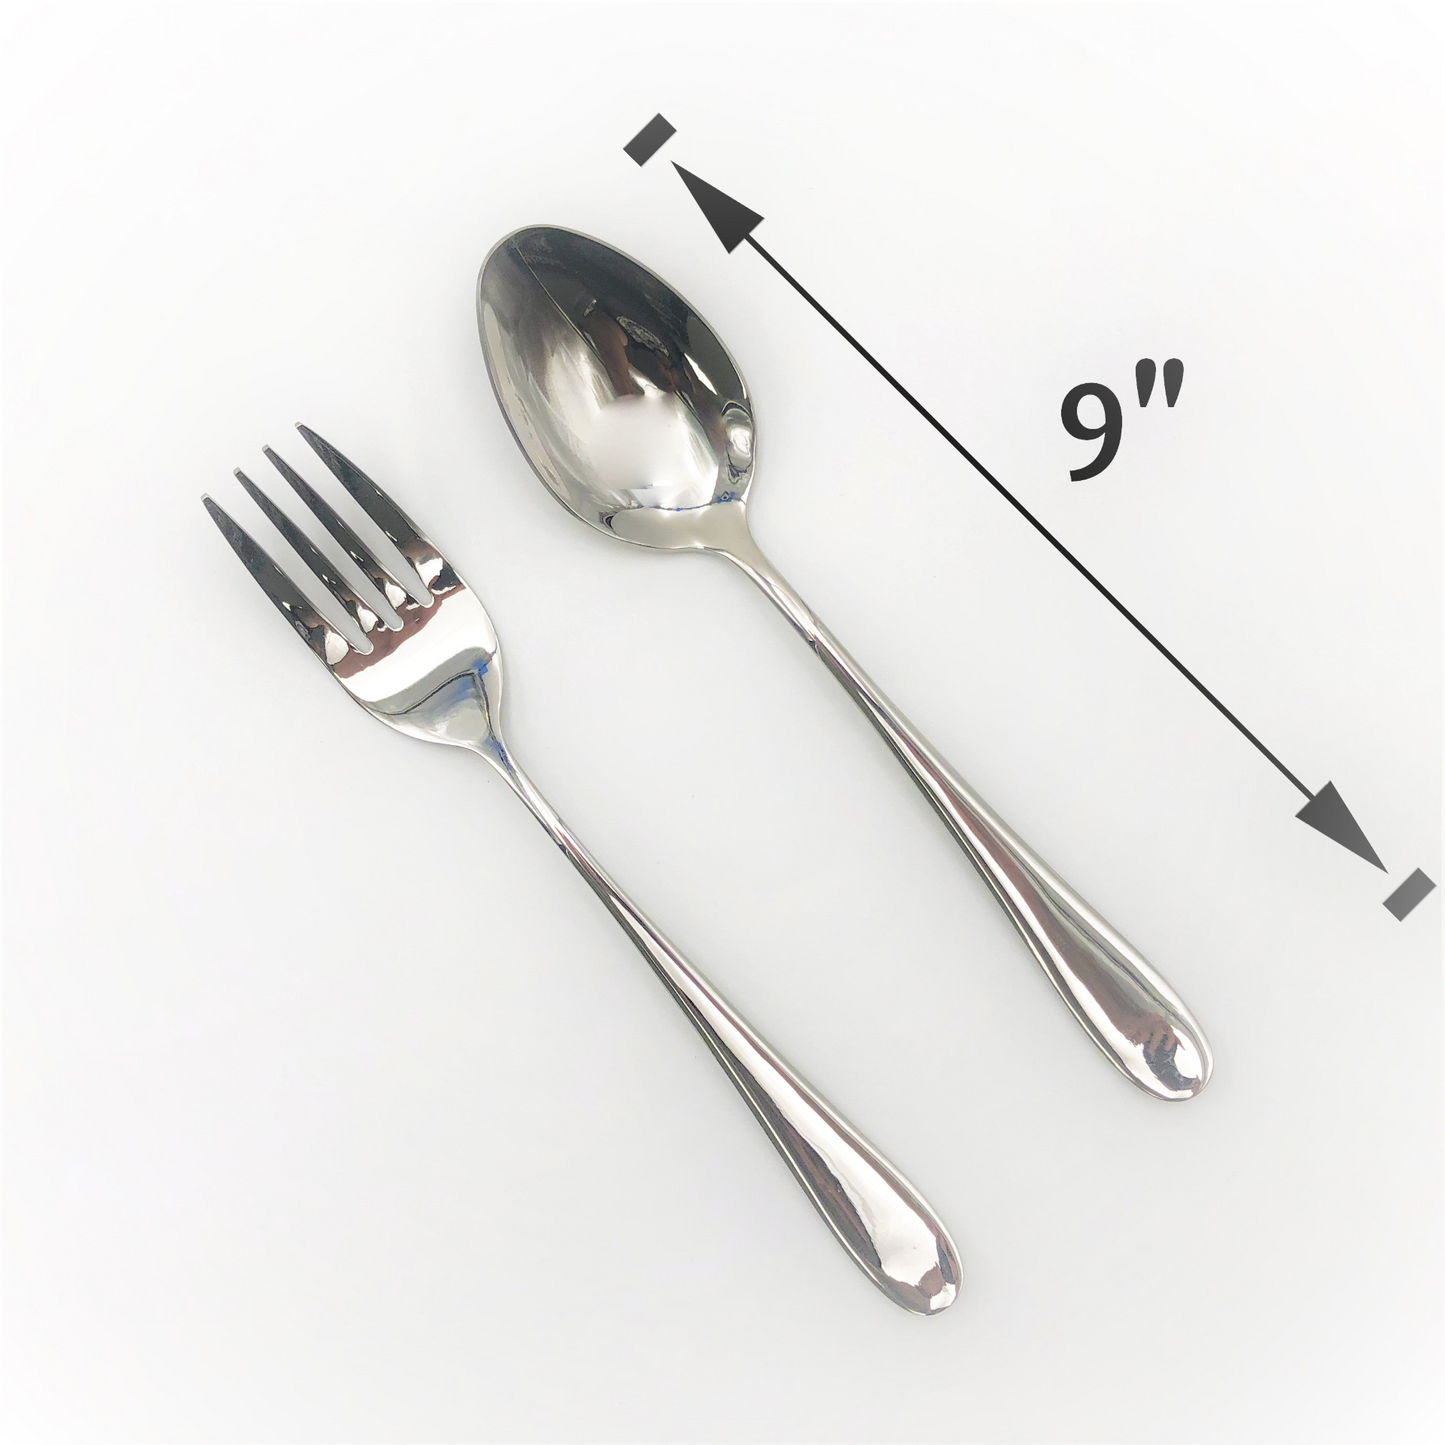 Stainless Steel Serving Fork And Knife Set Of 2 Pieces Great For Entertaining WL-555048